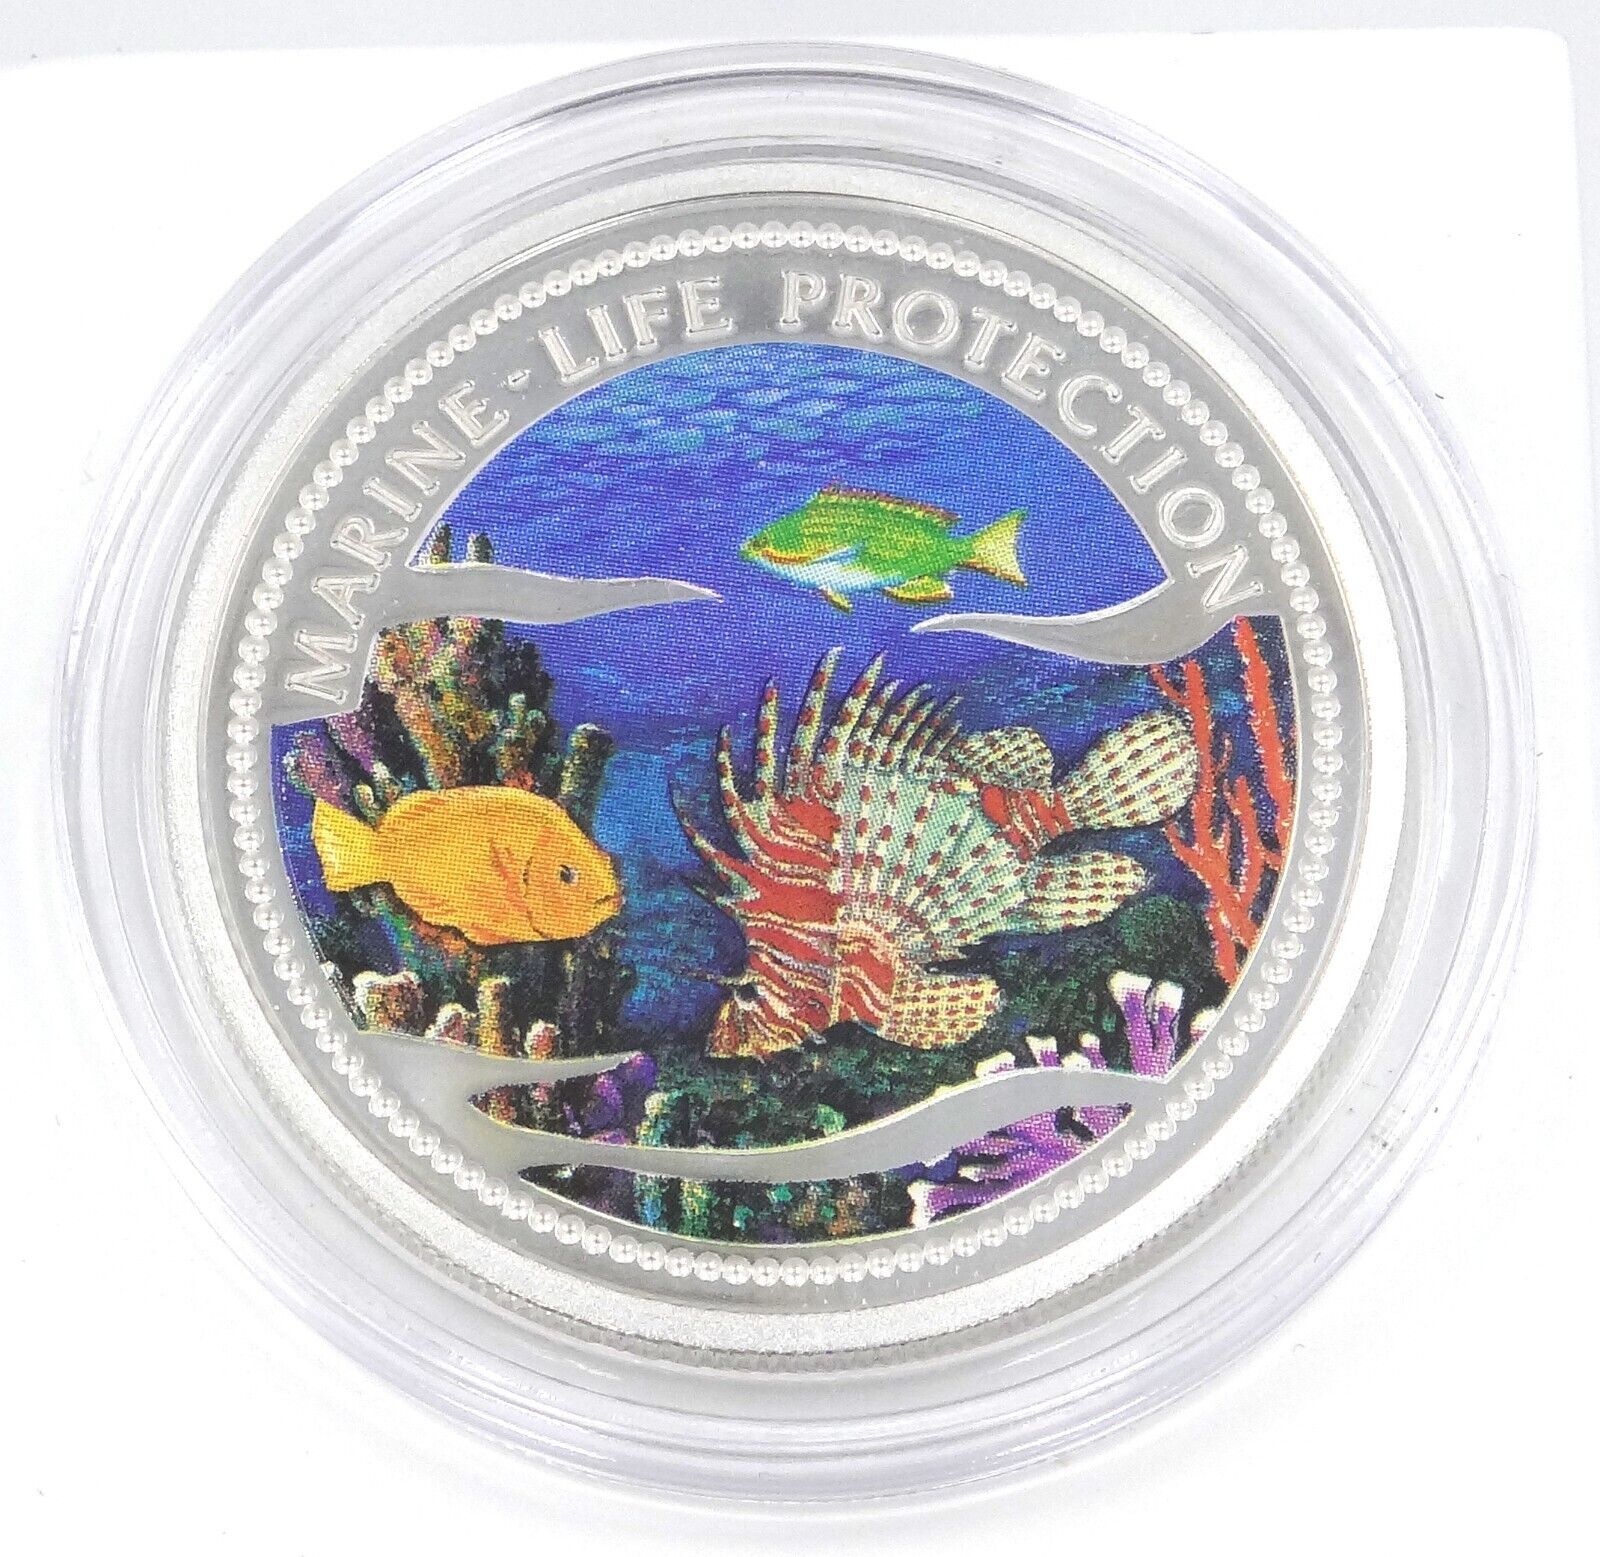 25g Silver Coin 2000 $5 Palau Color Proof Marine Life Protection-classypw.com-1